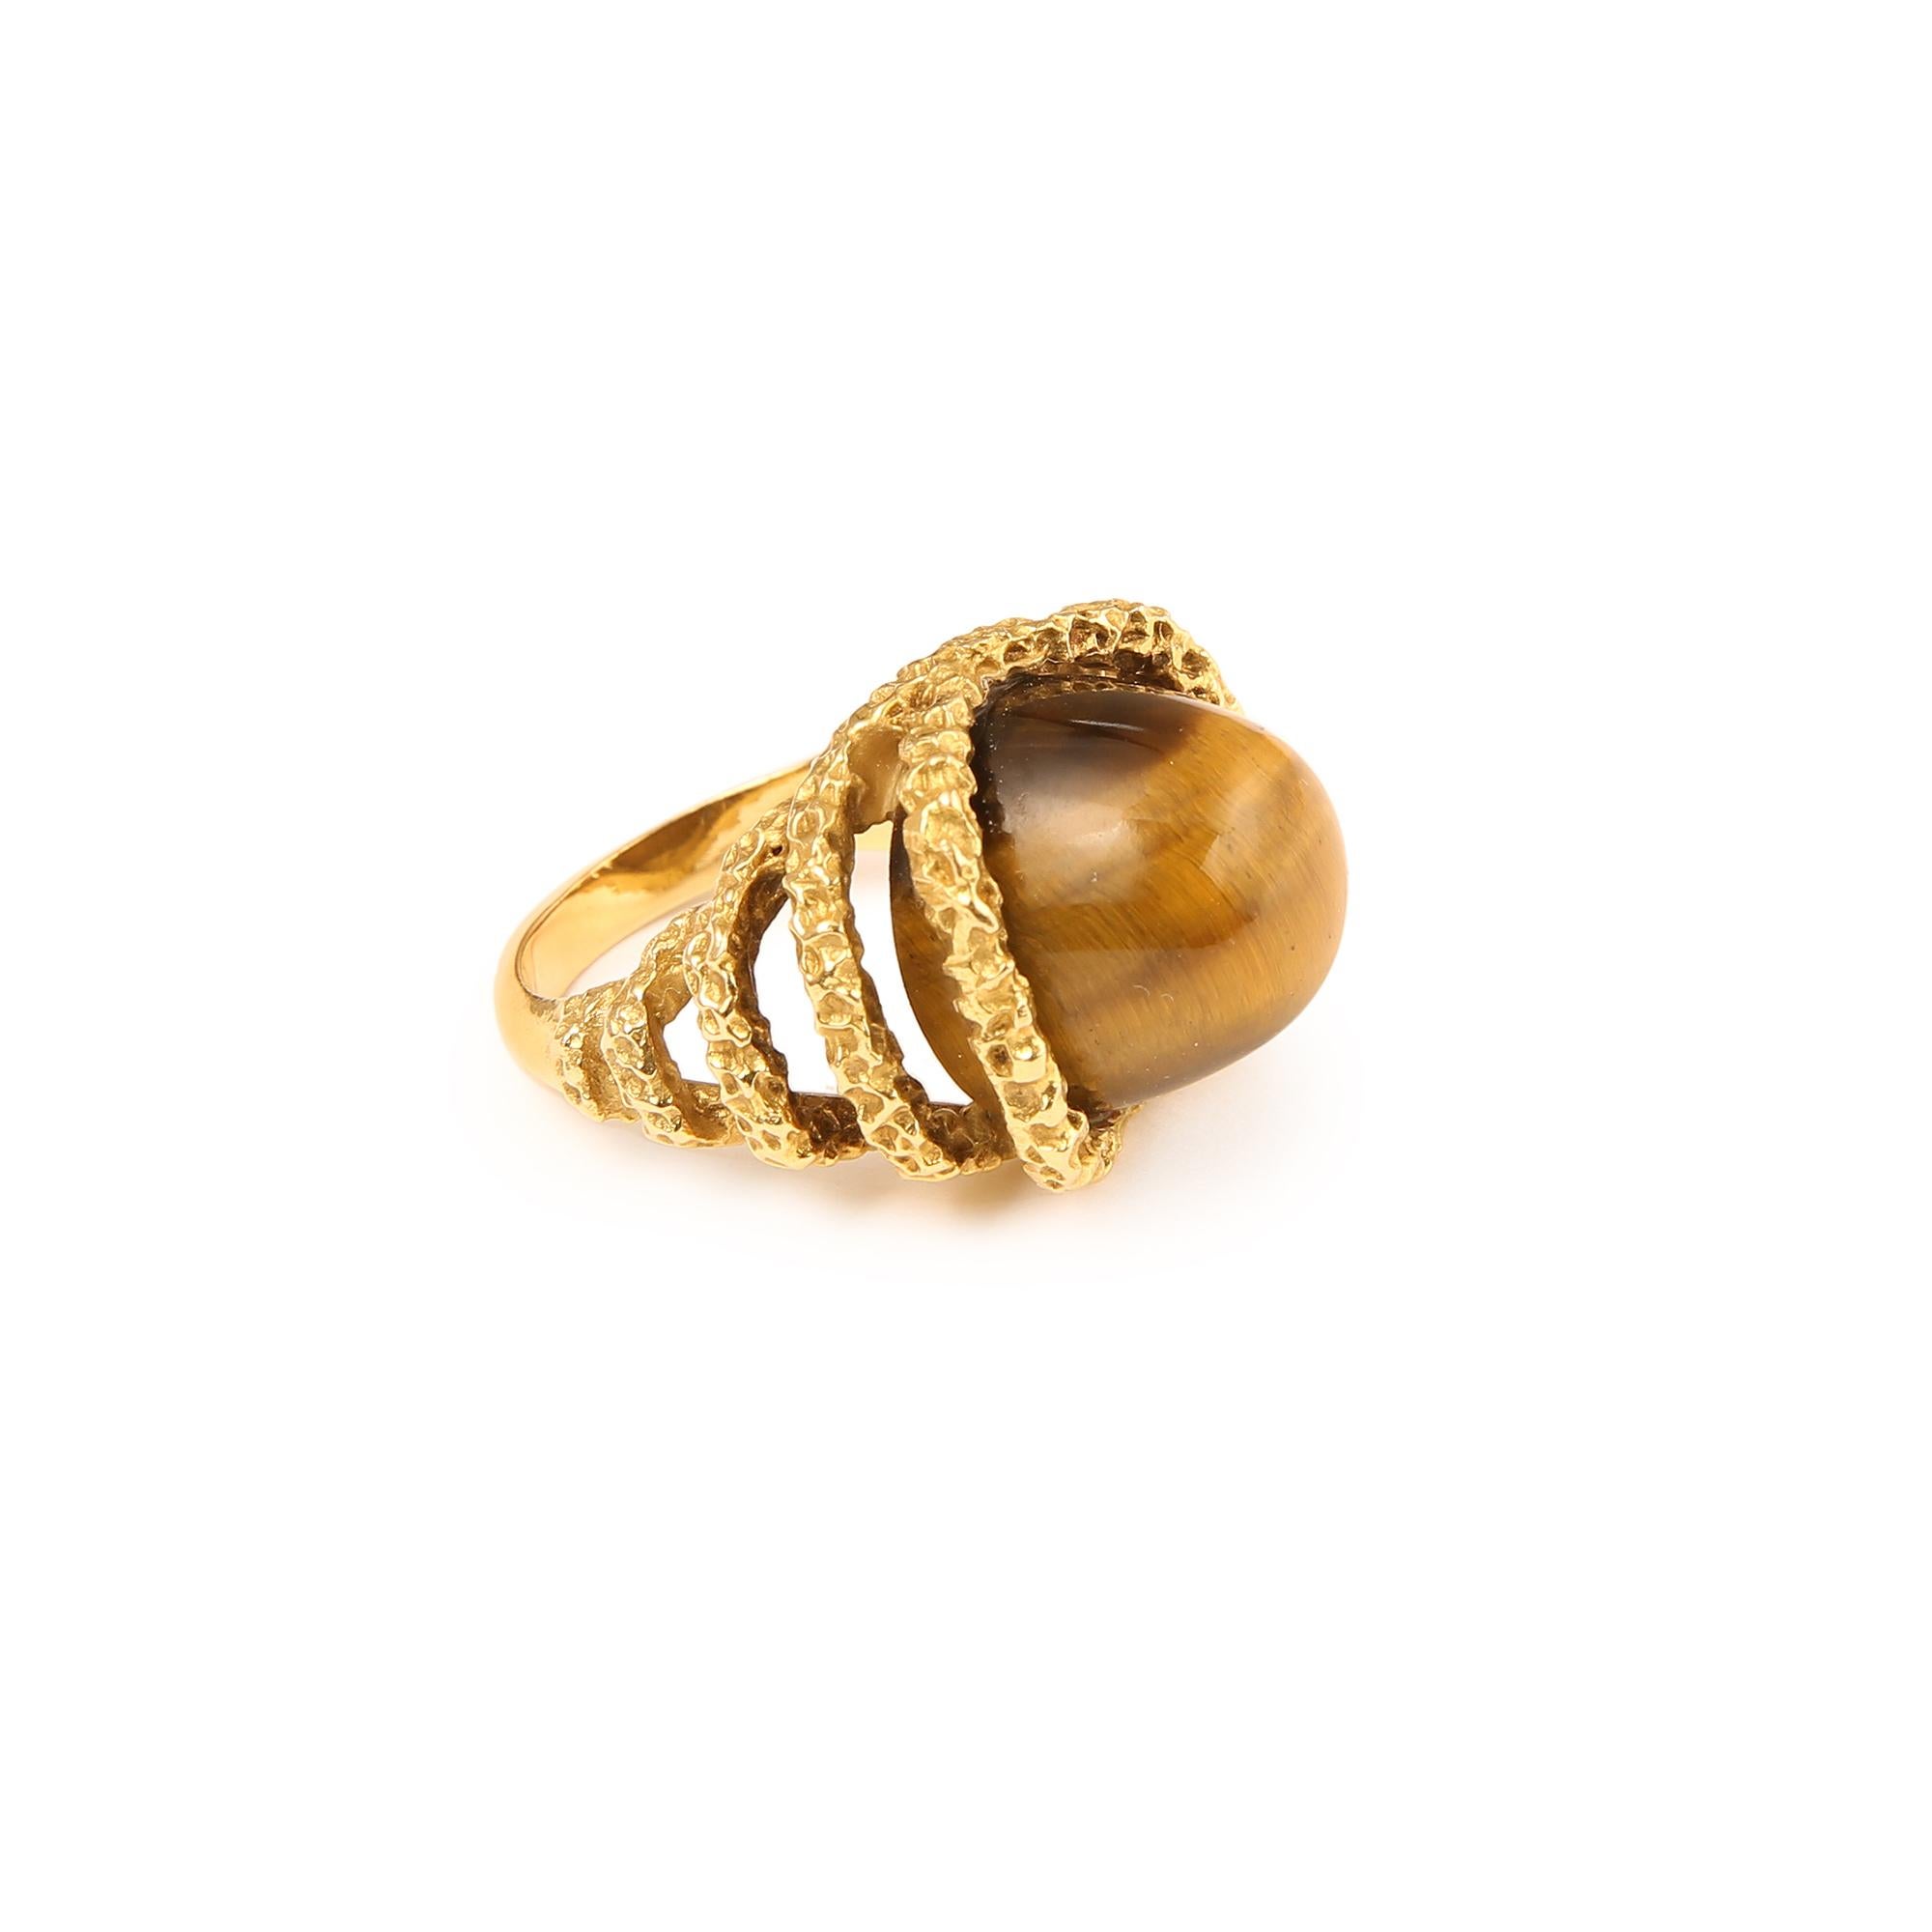 Original vintage cocktail ring in yellow gold with a large tiger eye cabochon.

Ring size: 18.16 x 21.50 x 13.36 mm (0.715 x 0.846 x 0.526 inch)

Finger size : 53 (US size : 6.25)

18K yellow gold, 750/1000th (owl hallmark)

One of a kind